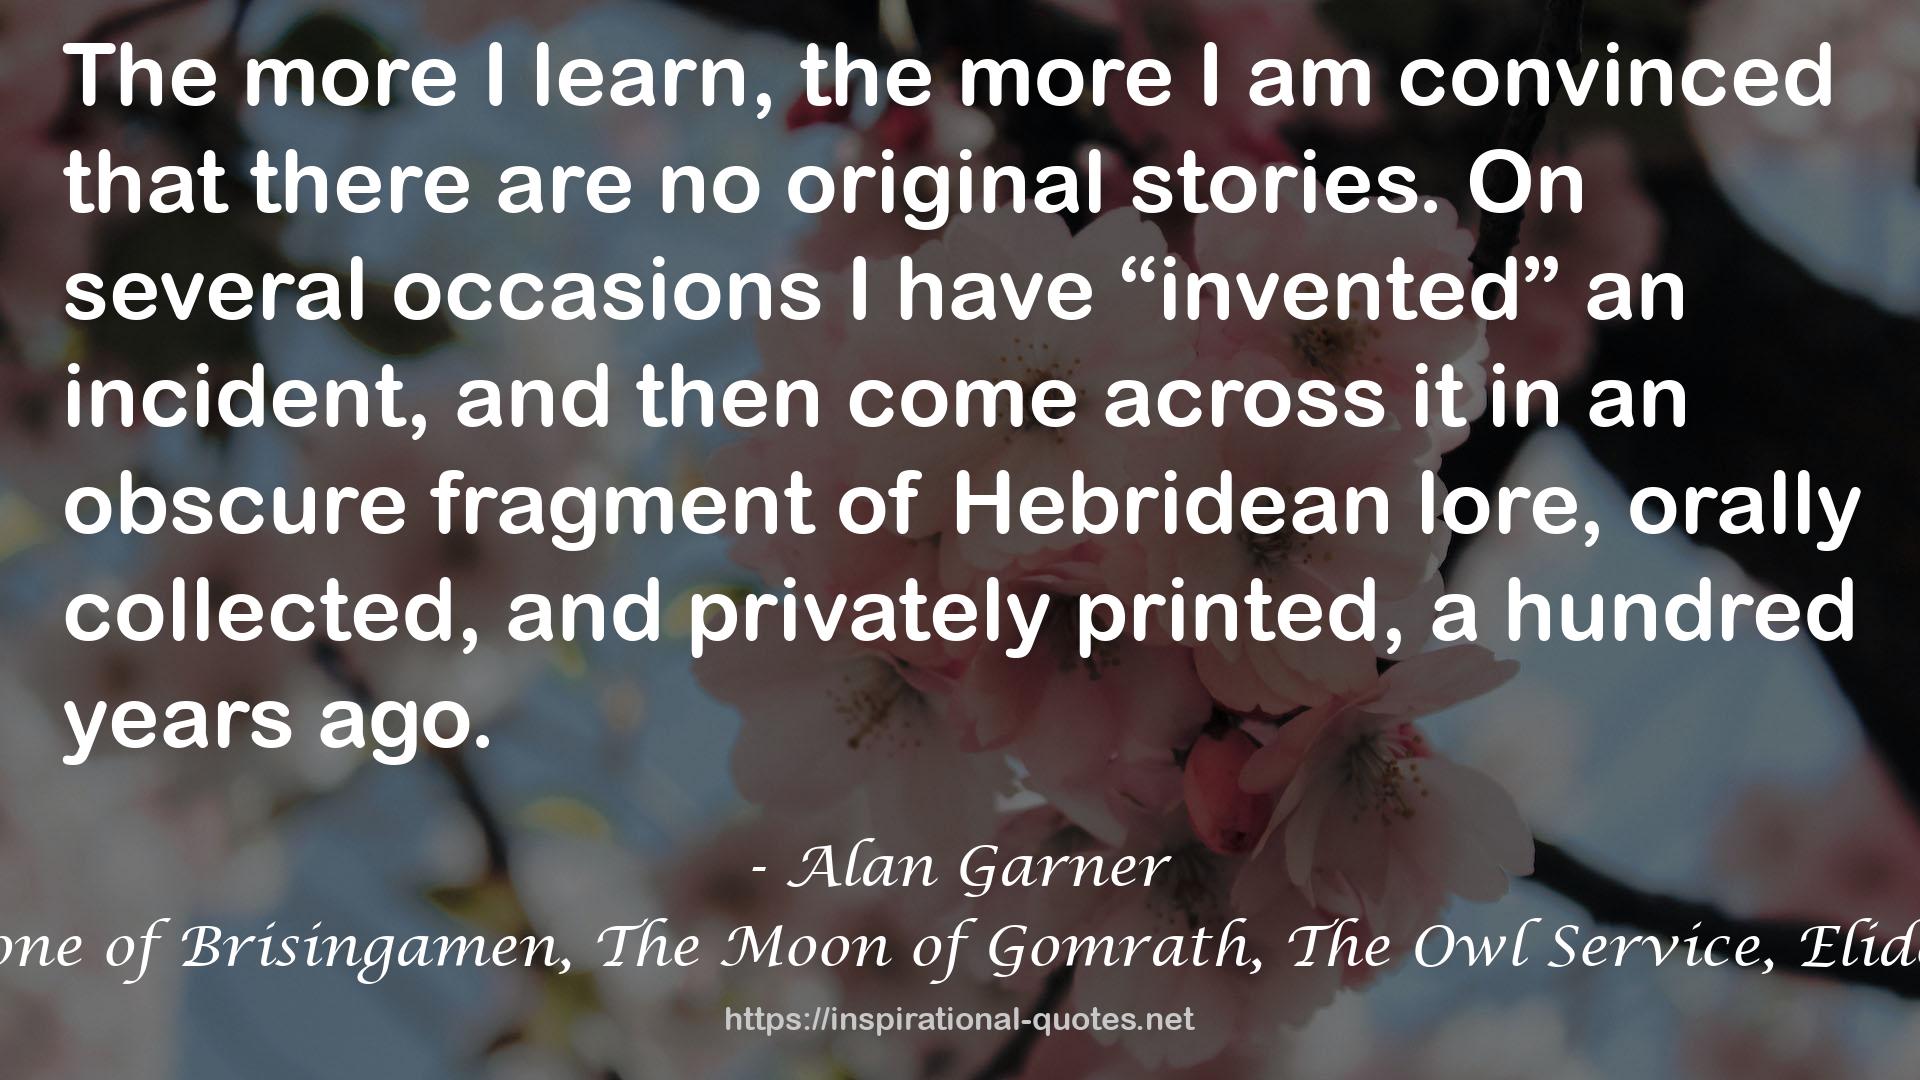 Alan Garner Classic Collection (7 Books) - Weirdstone of Brisingamen, The Moon of Gomrath, The Owl Service, Elidor, Red Shift, Lad of the Gad, A Bag of Moonshine) QUOTES